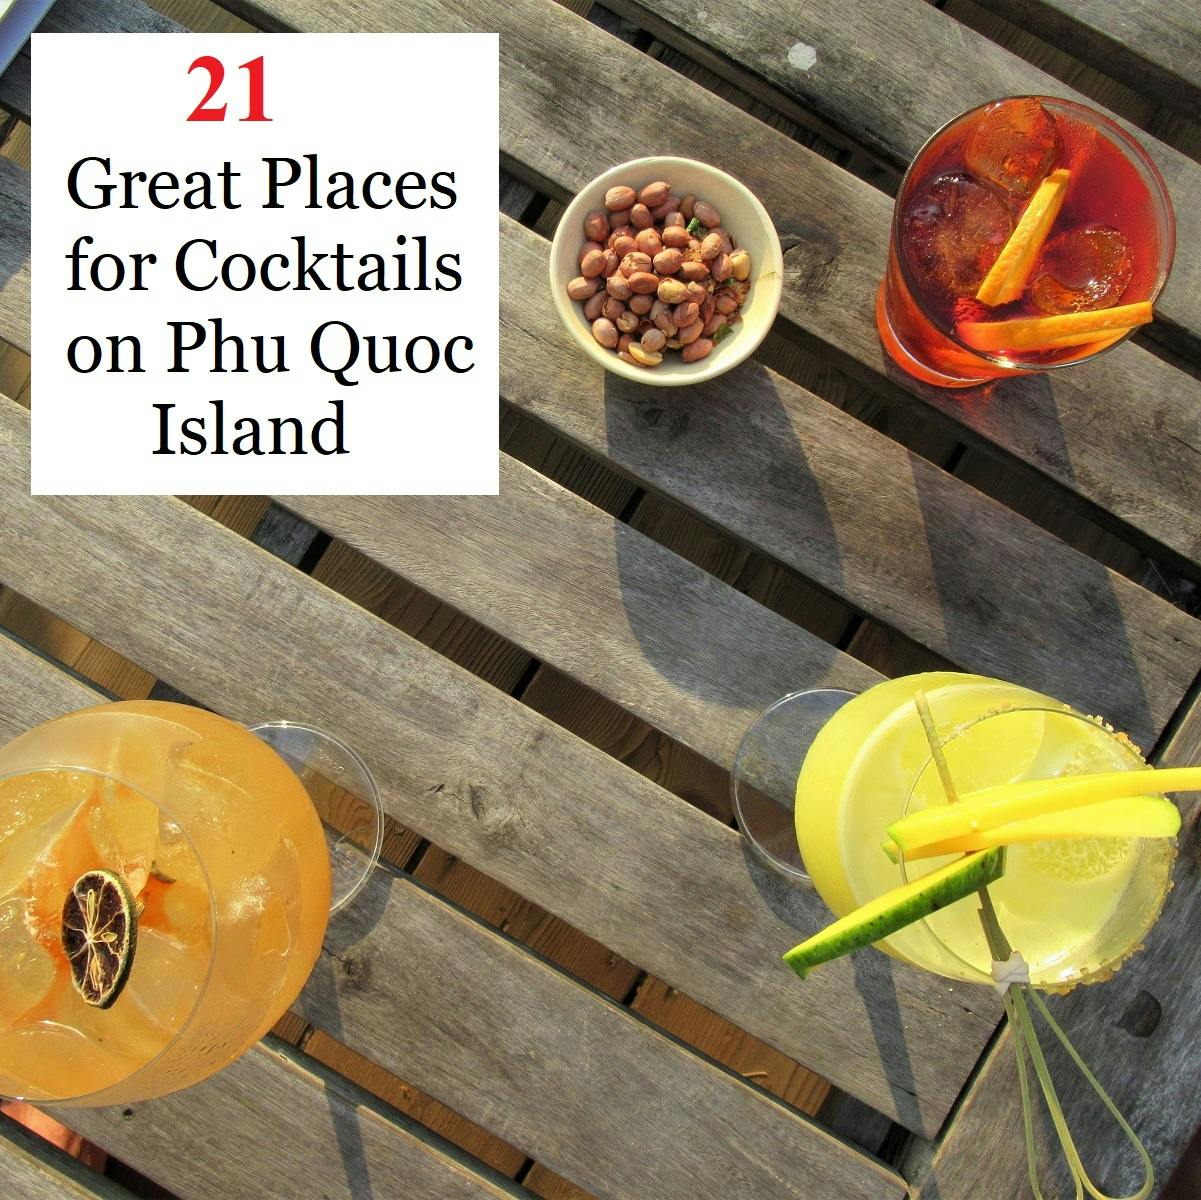 21 Great Places for Cocktails on Phu Quoc Island